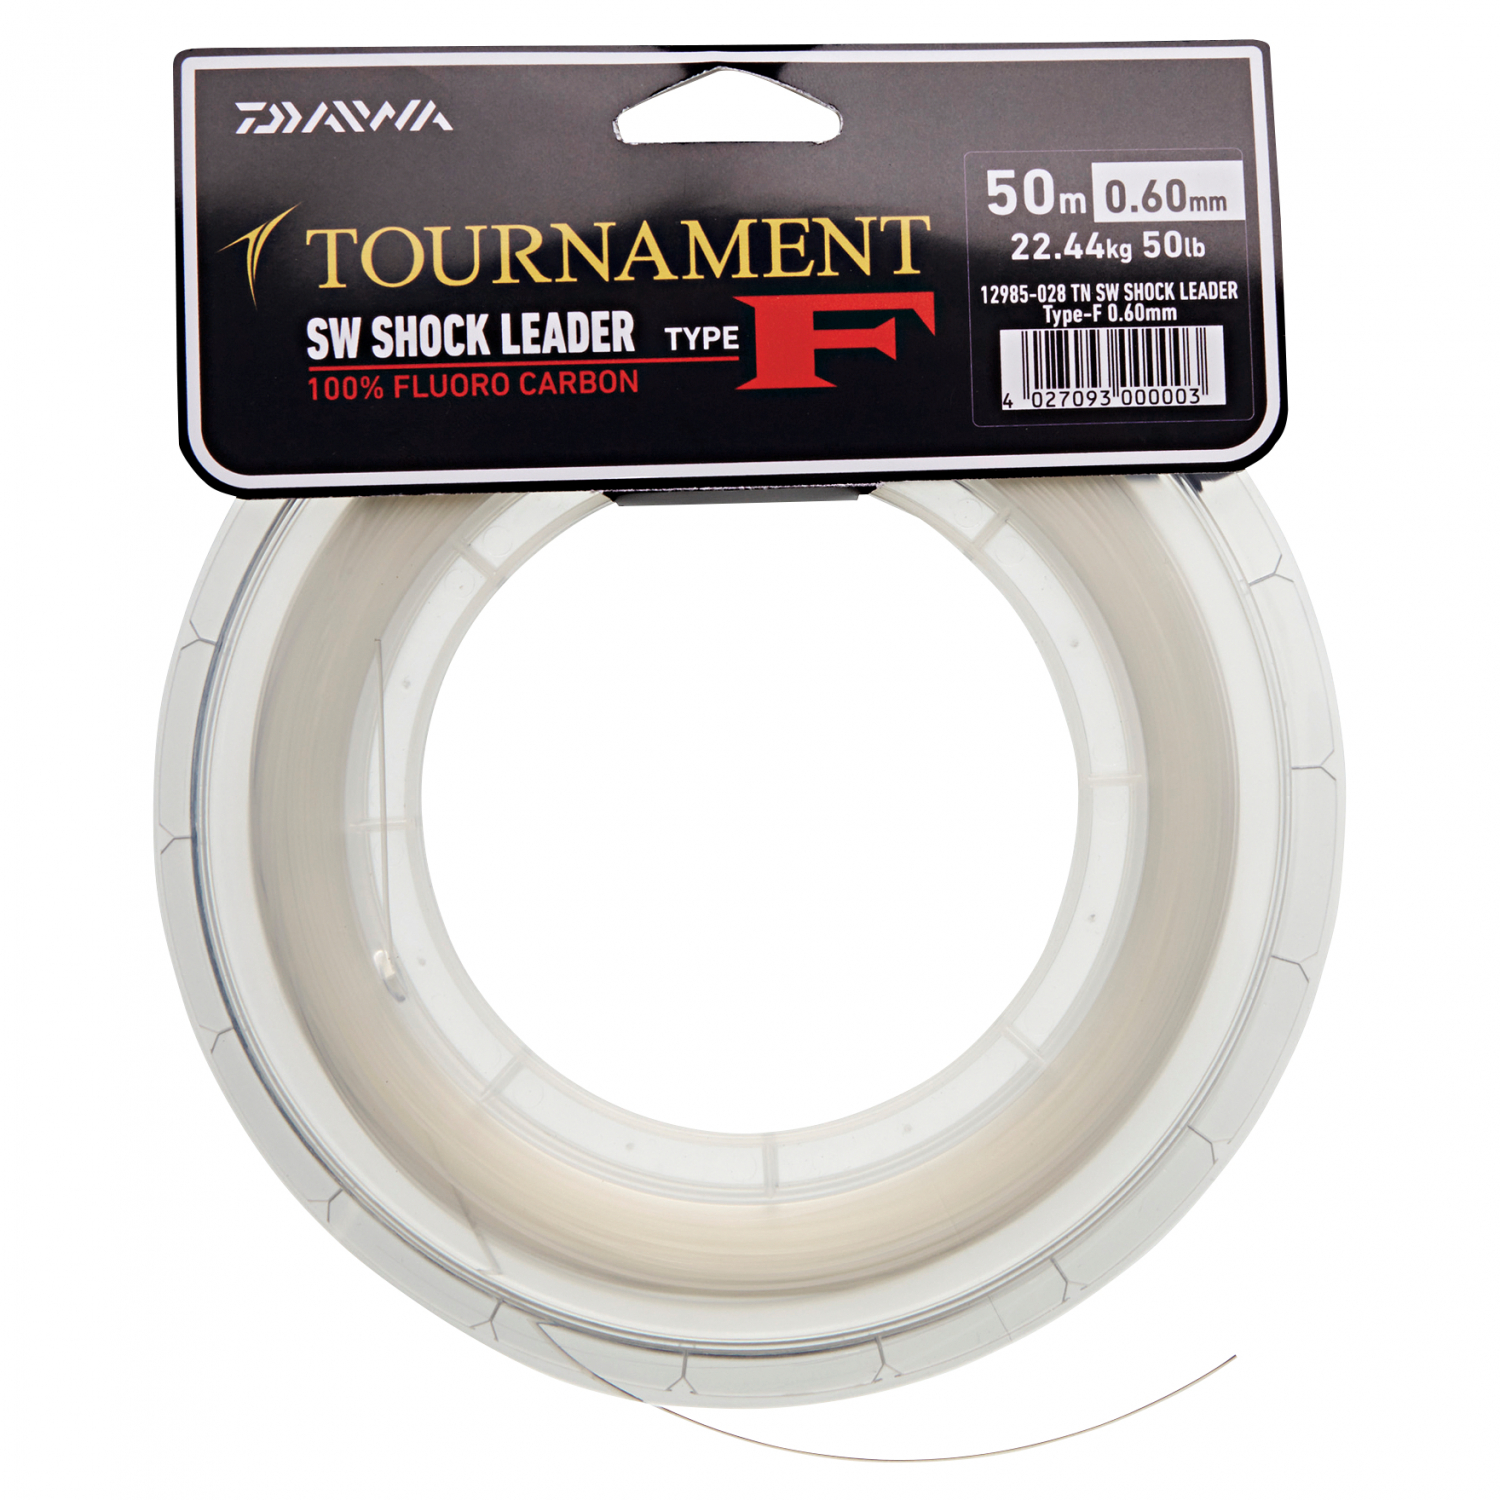 Daiwa Trace Line Tournament S.W. Shockleader Type F (50 m) at low